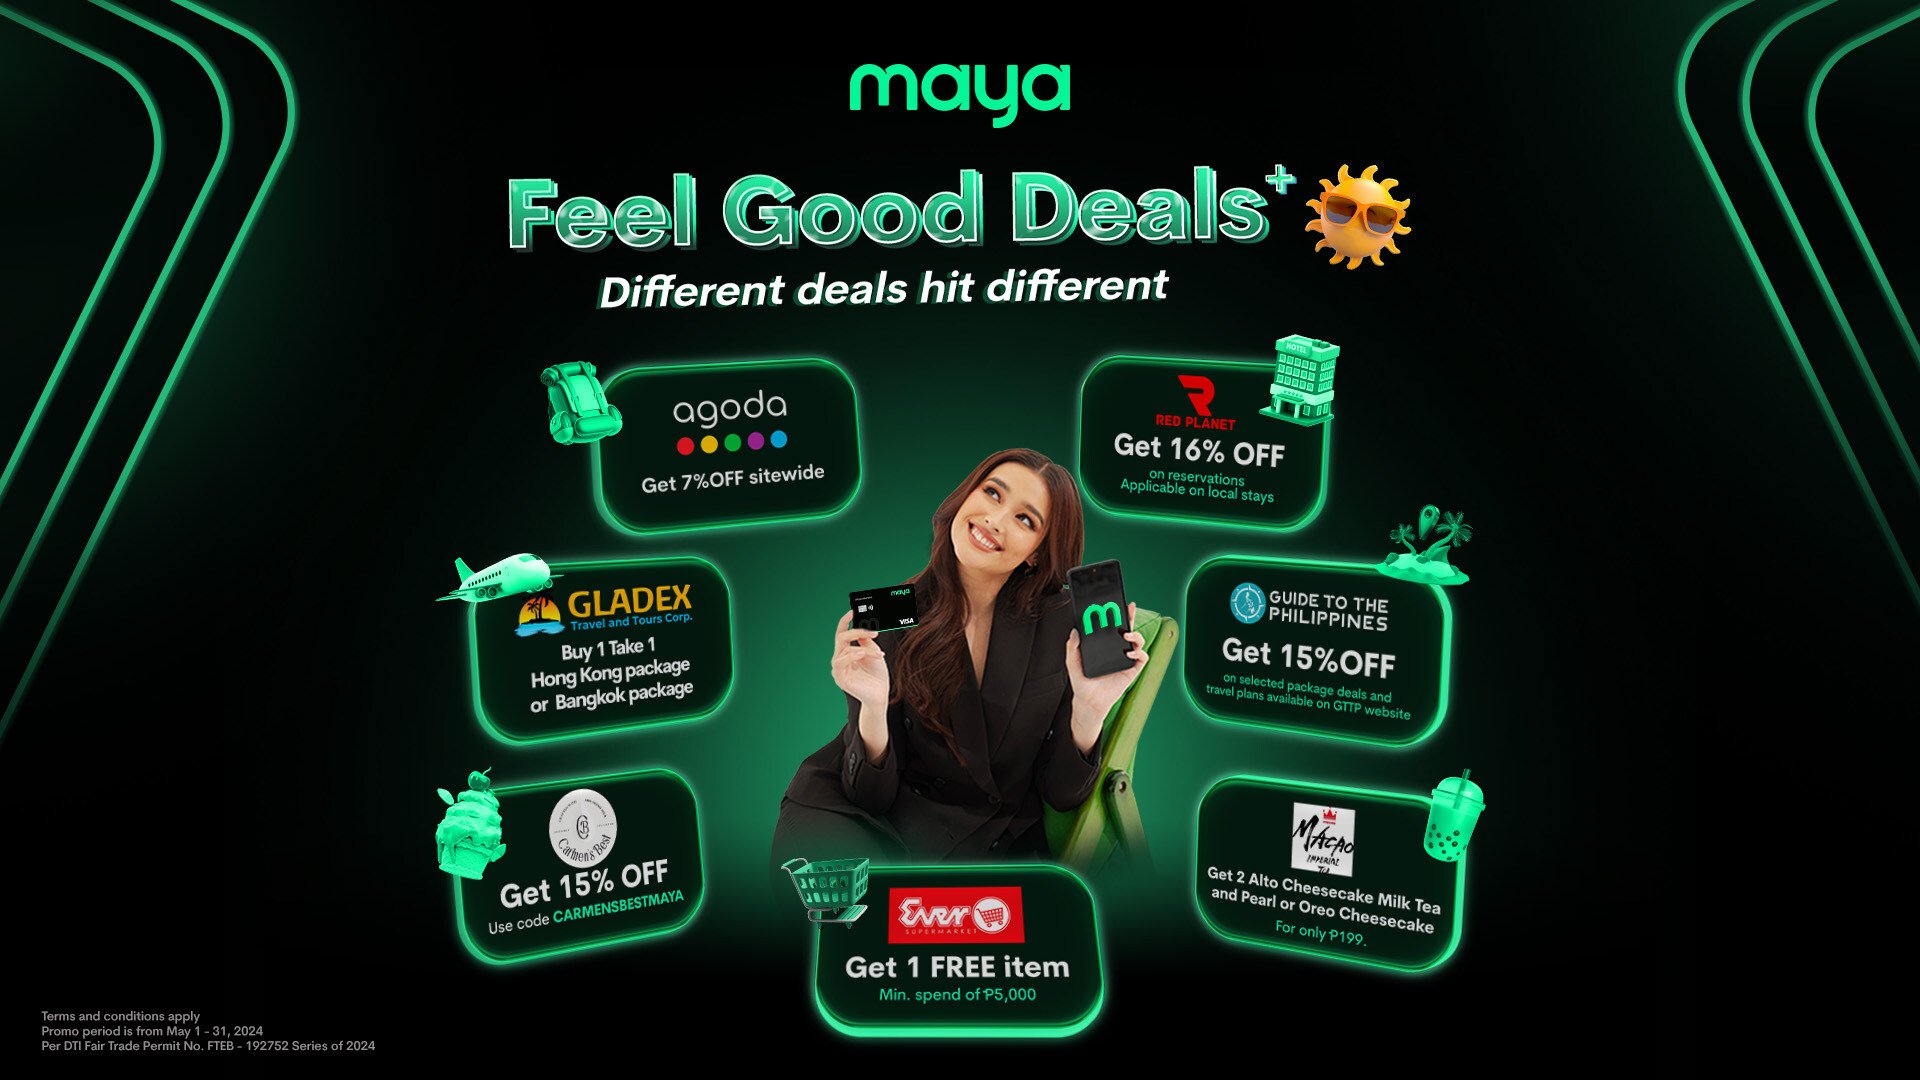 Feel Good with deals up to 16% OFF this May!